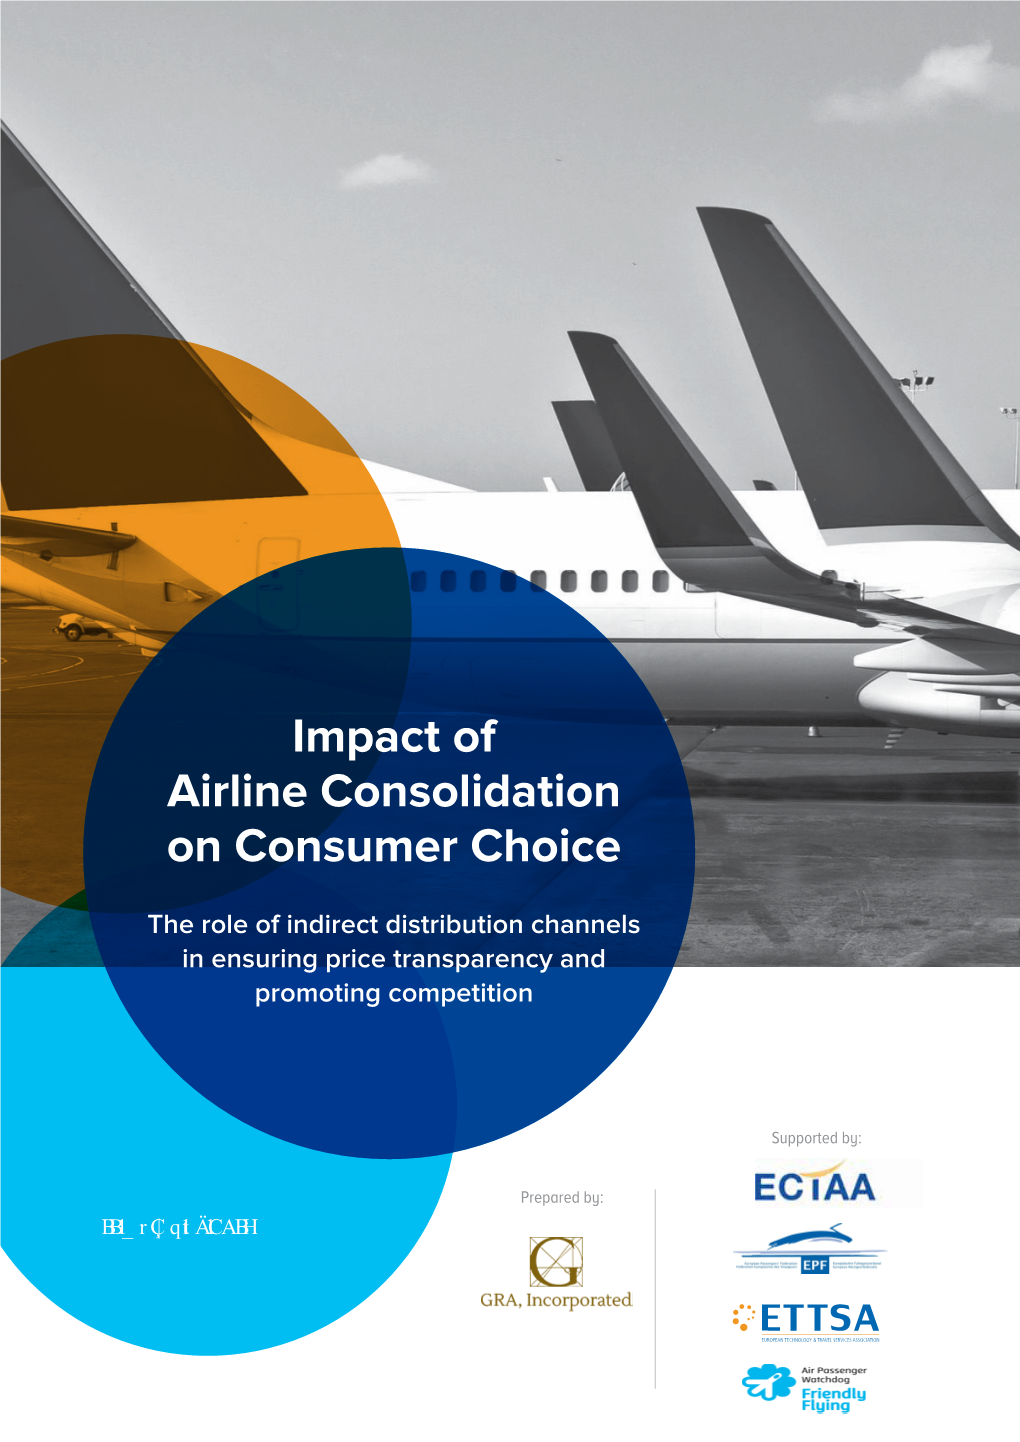 Impact of Airline Consolidation on Consumer Choice